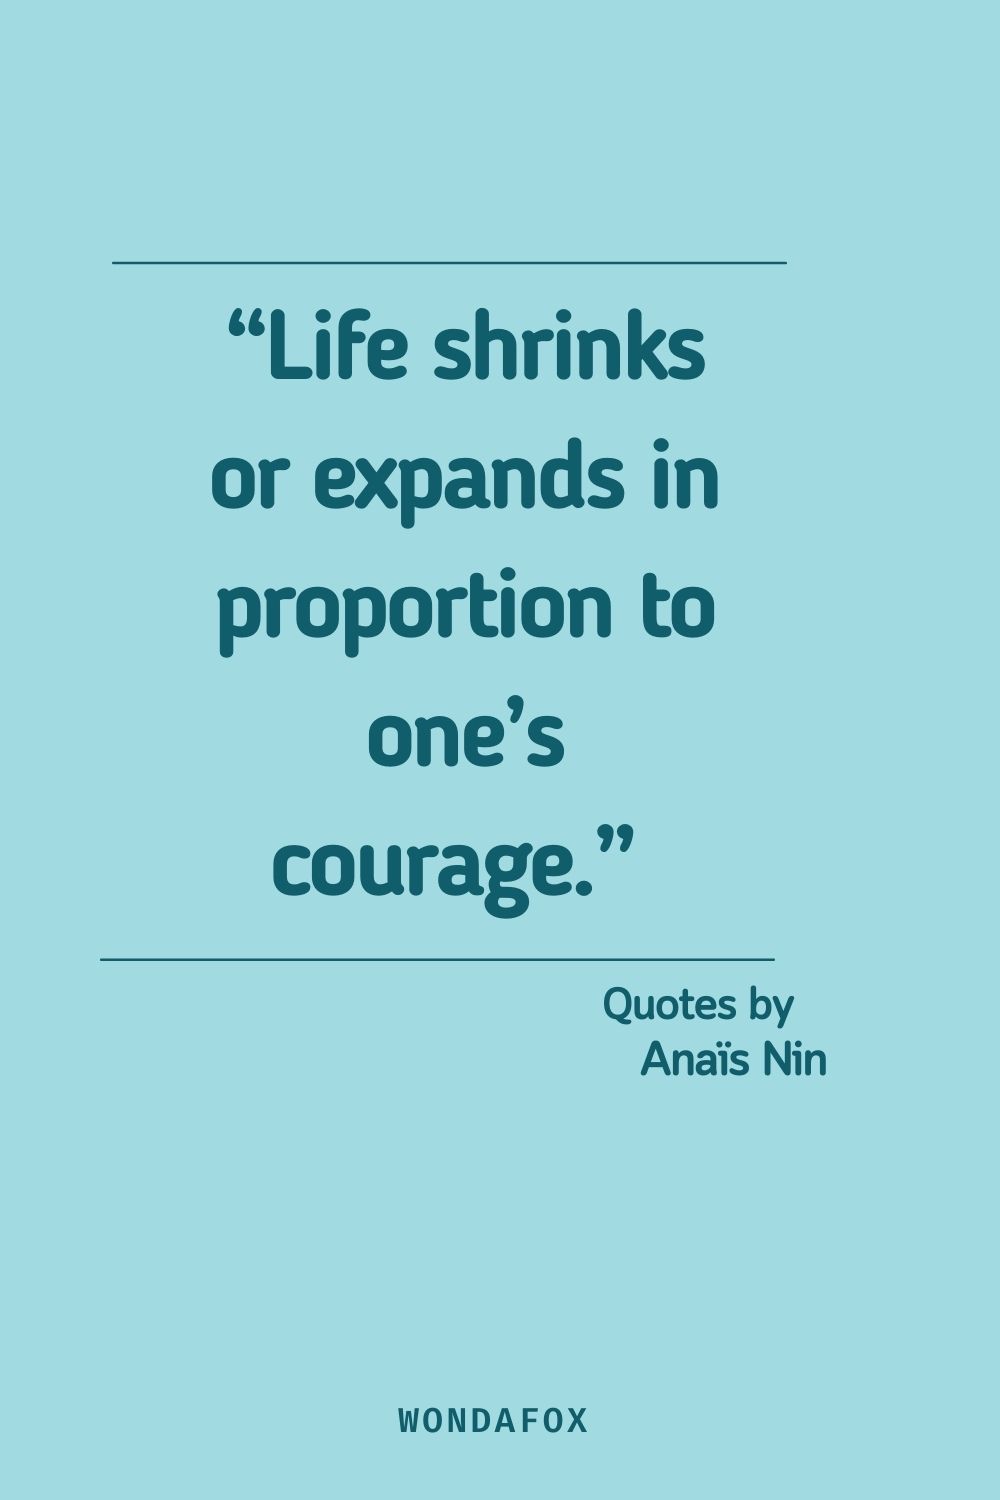 “Life shrinks or expands in proportion to one’s courage.” 
Anaïs Nin